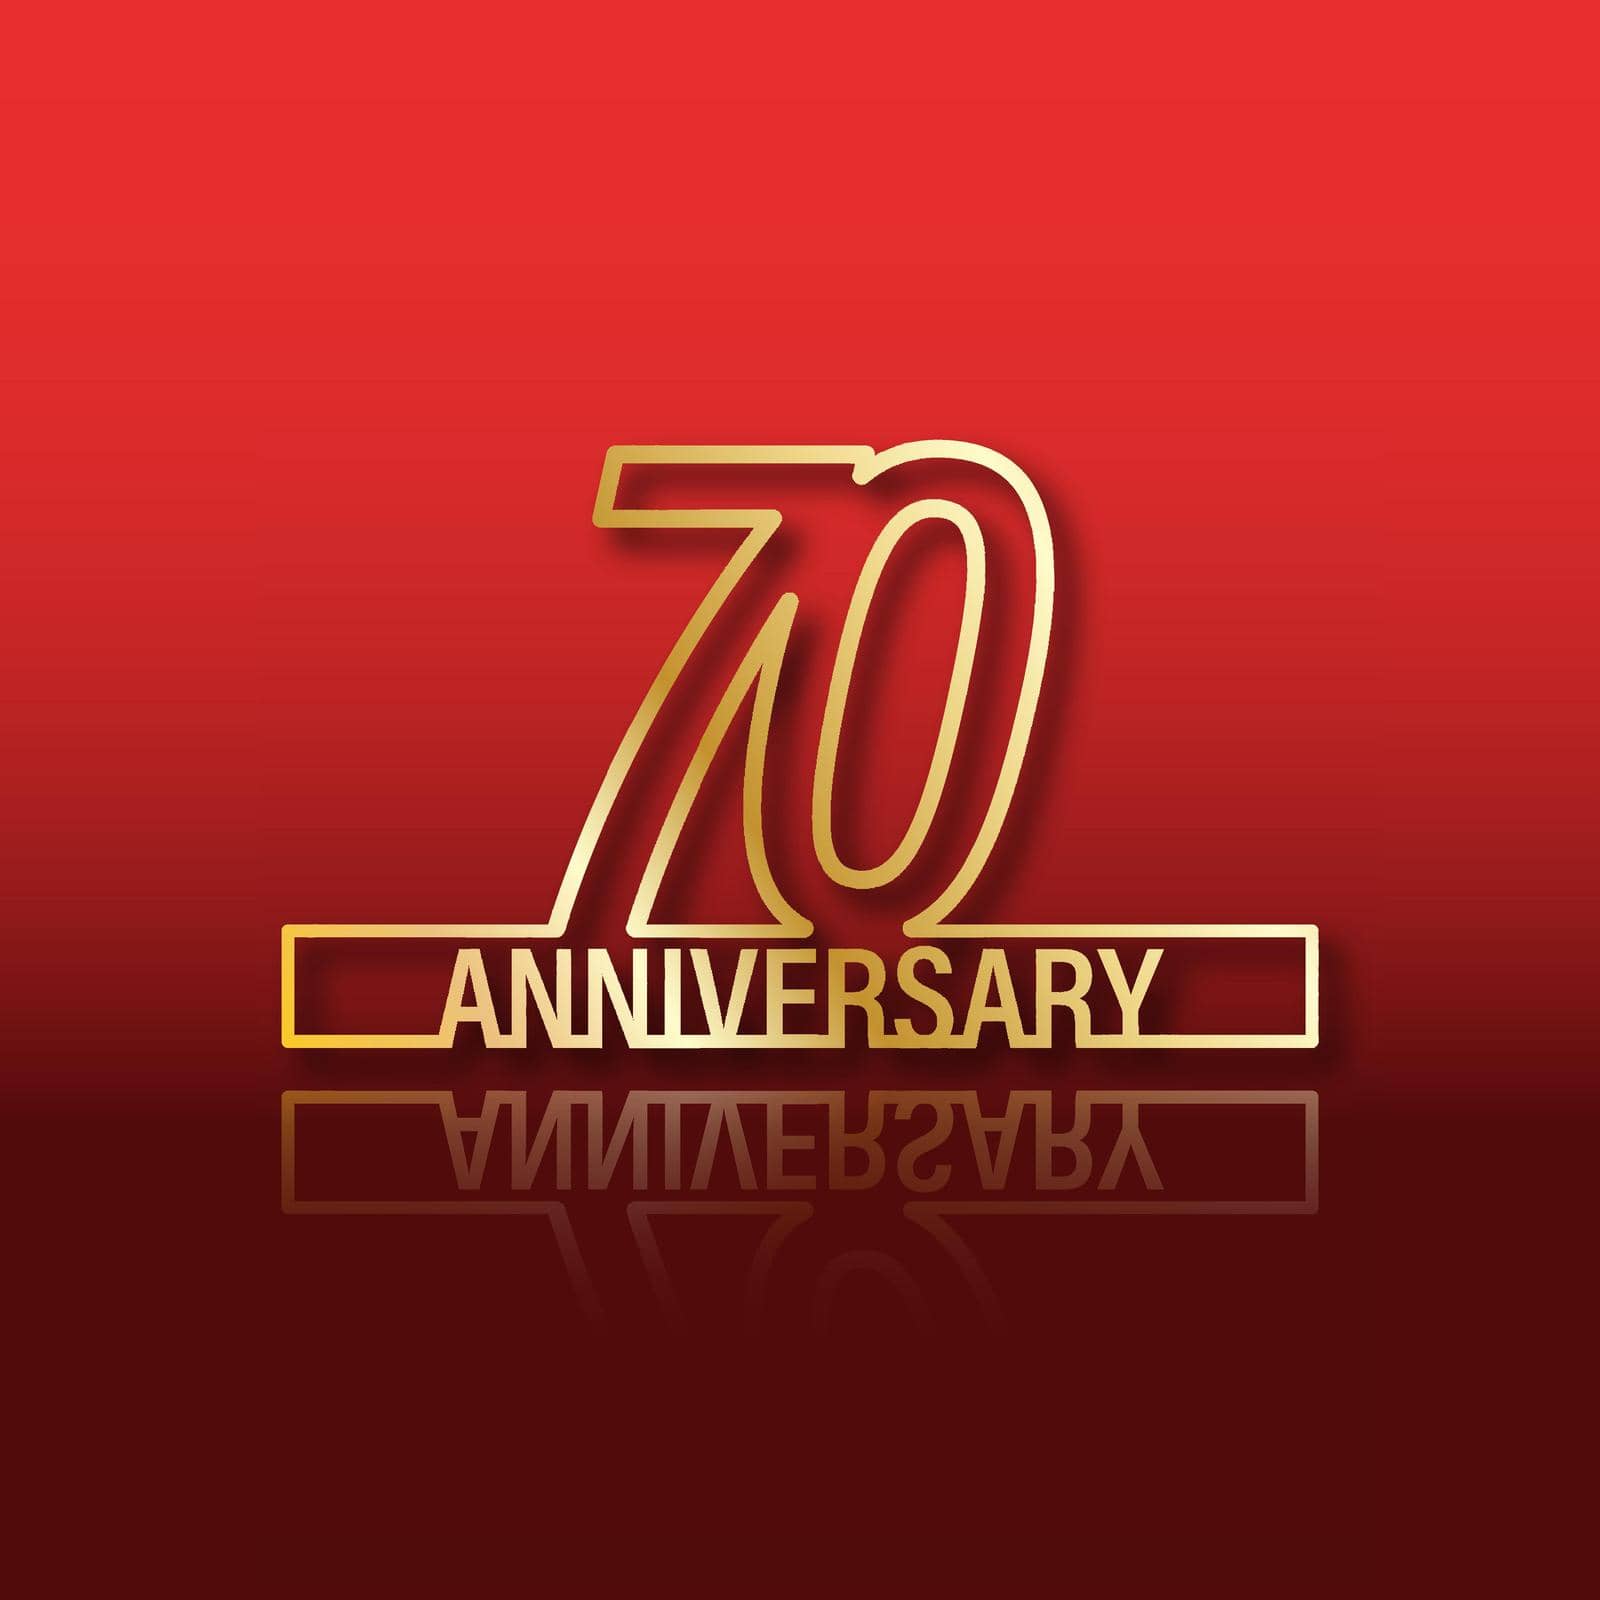 70 anniversary. Stylized gold lettering with reflection on a red gradient background by Grommik